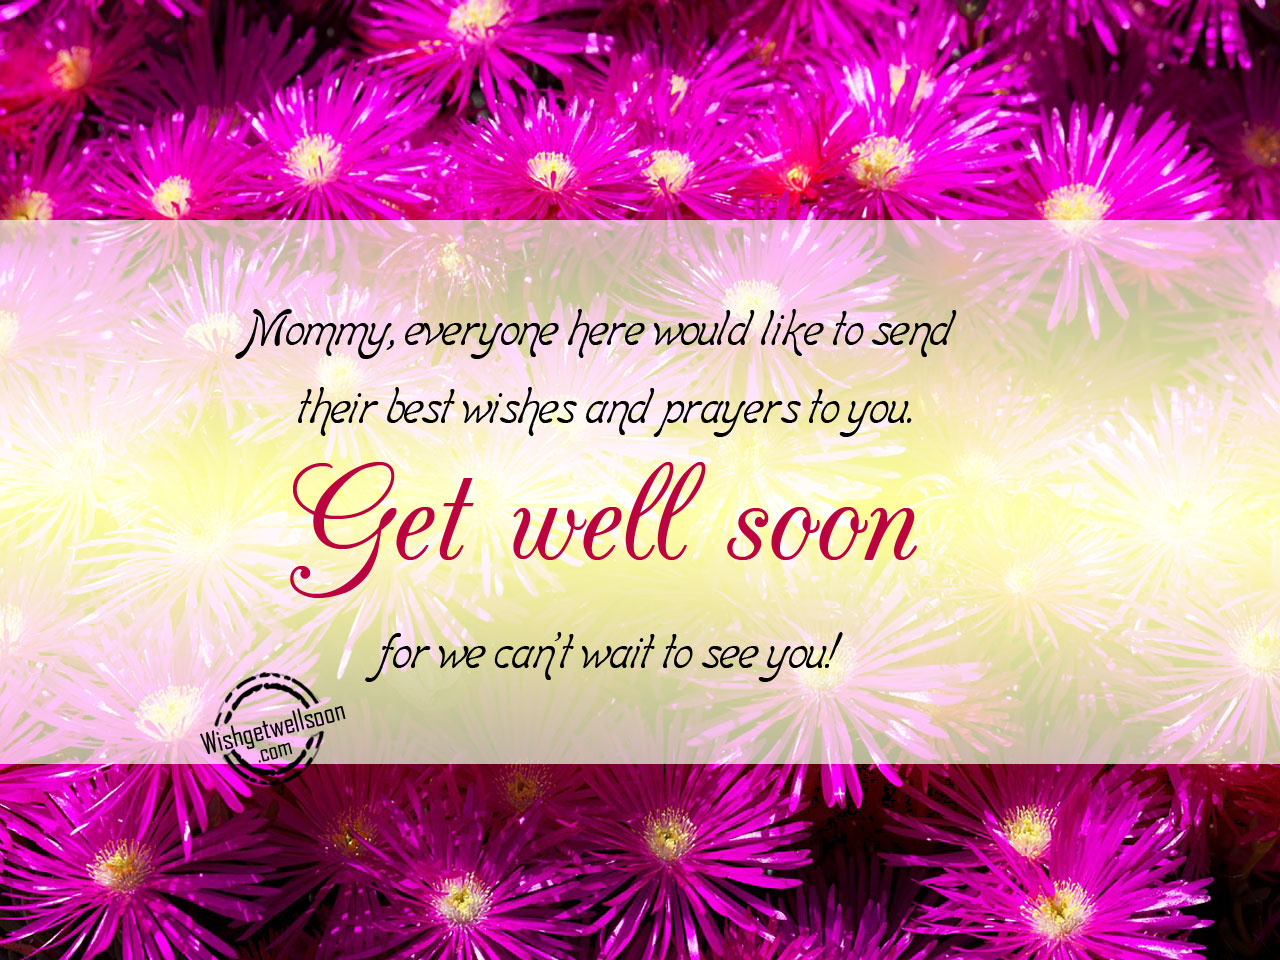 Get Well Soon Wishes For Mother Pictures, Images